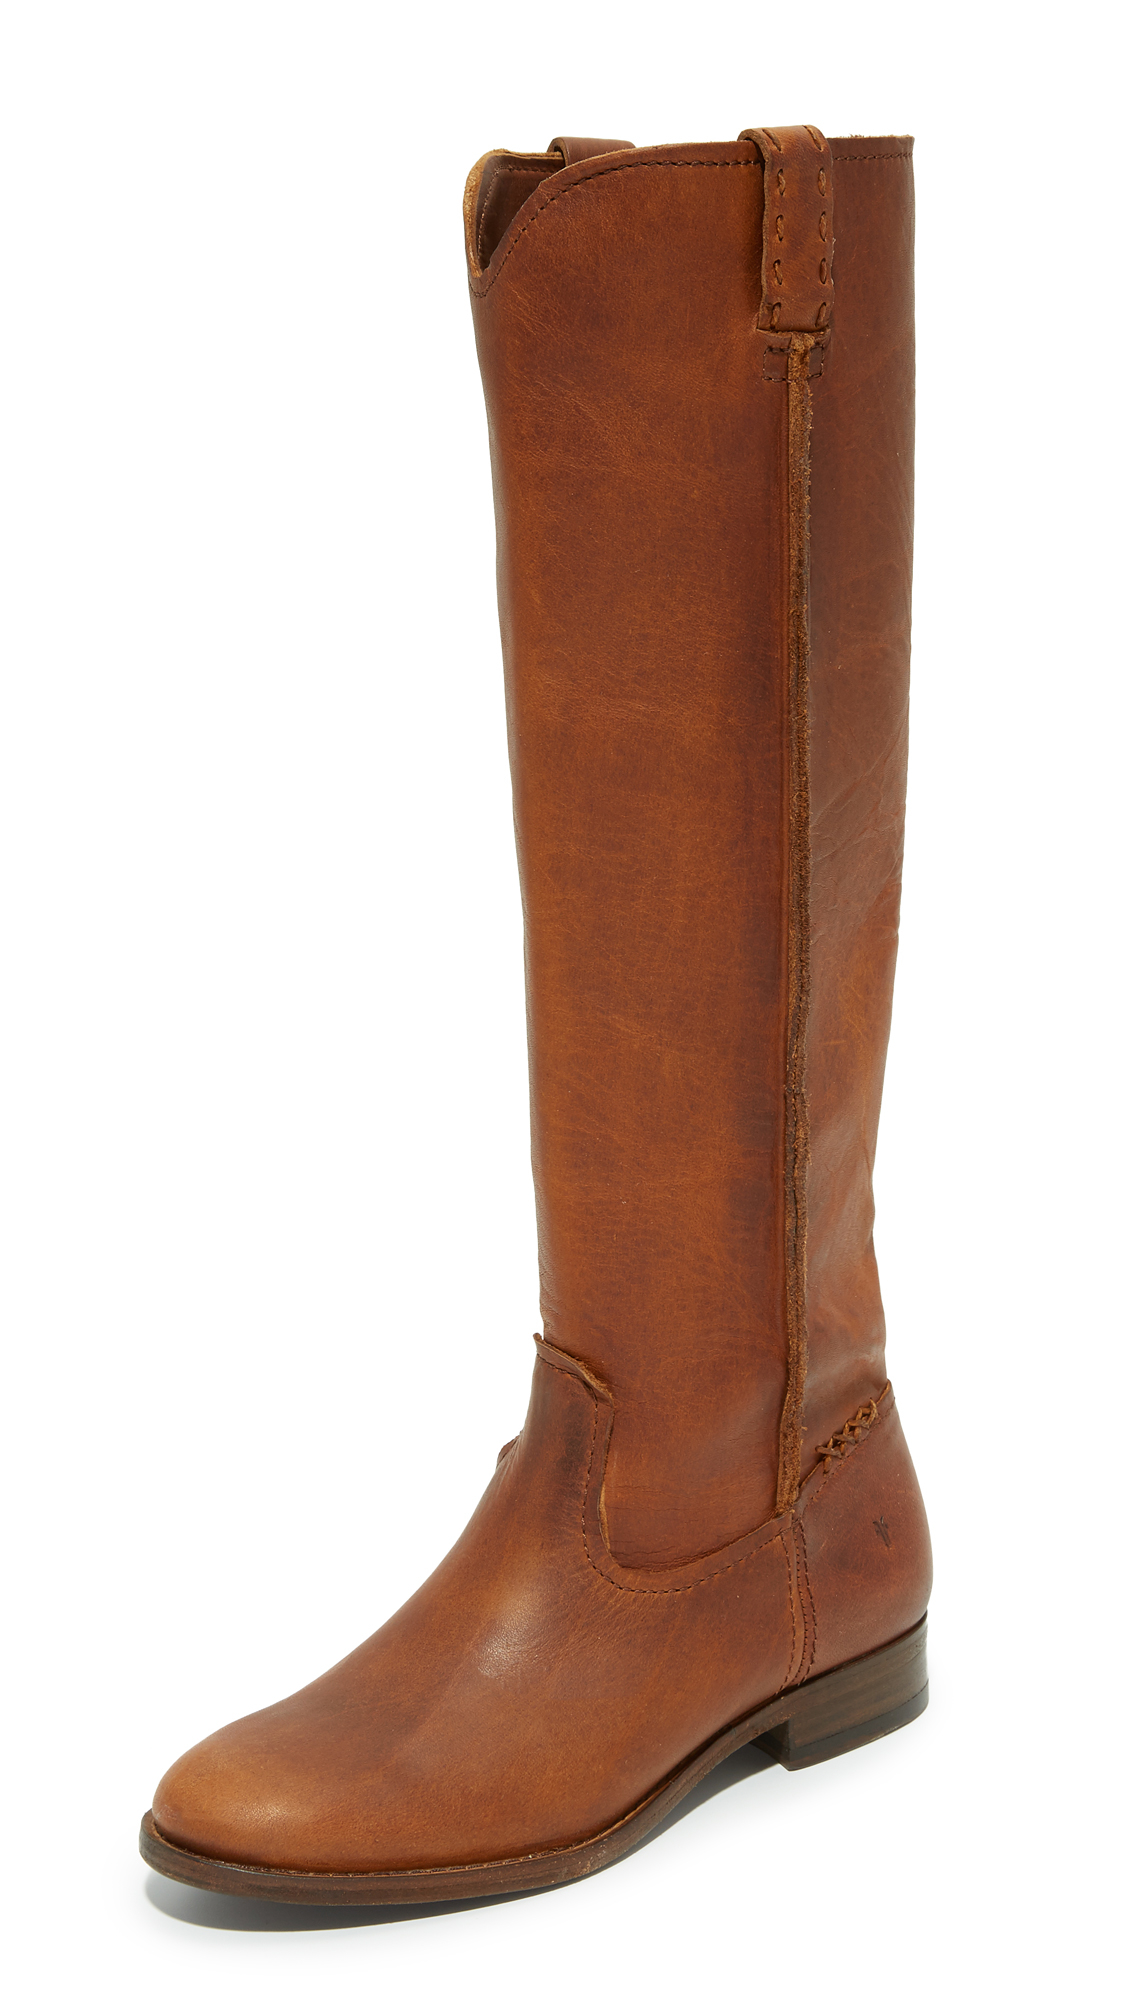 Frye Leather Cara Tall Boots in Cognac (Brown) - Lyst